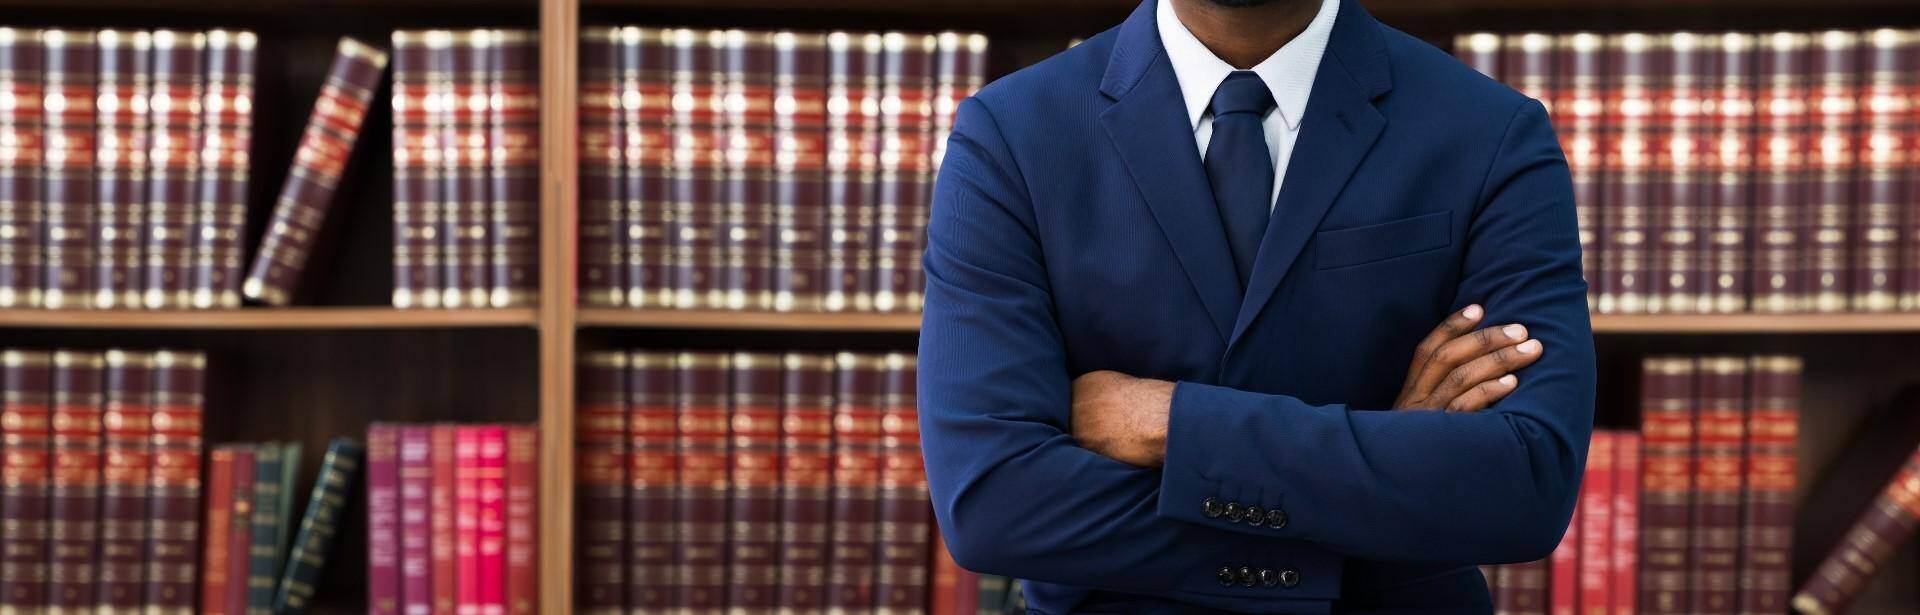 A black lawyer standing in front of a bookshelf of law book in Carrollton, Georgia